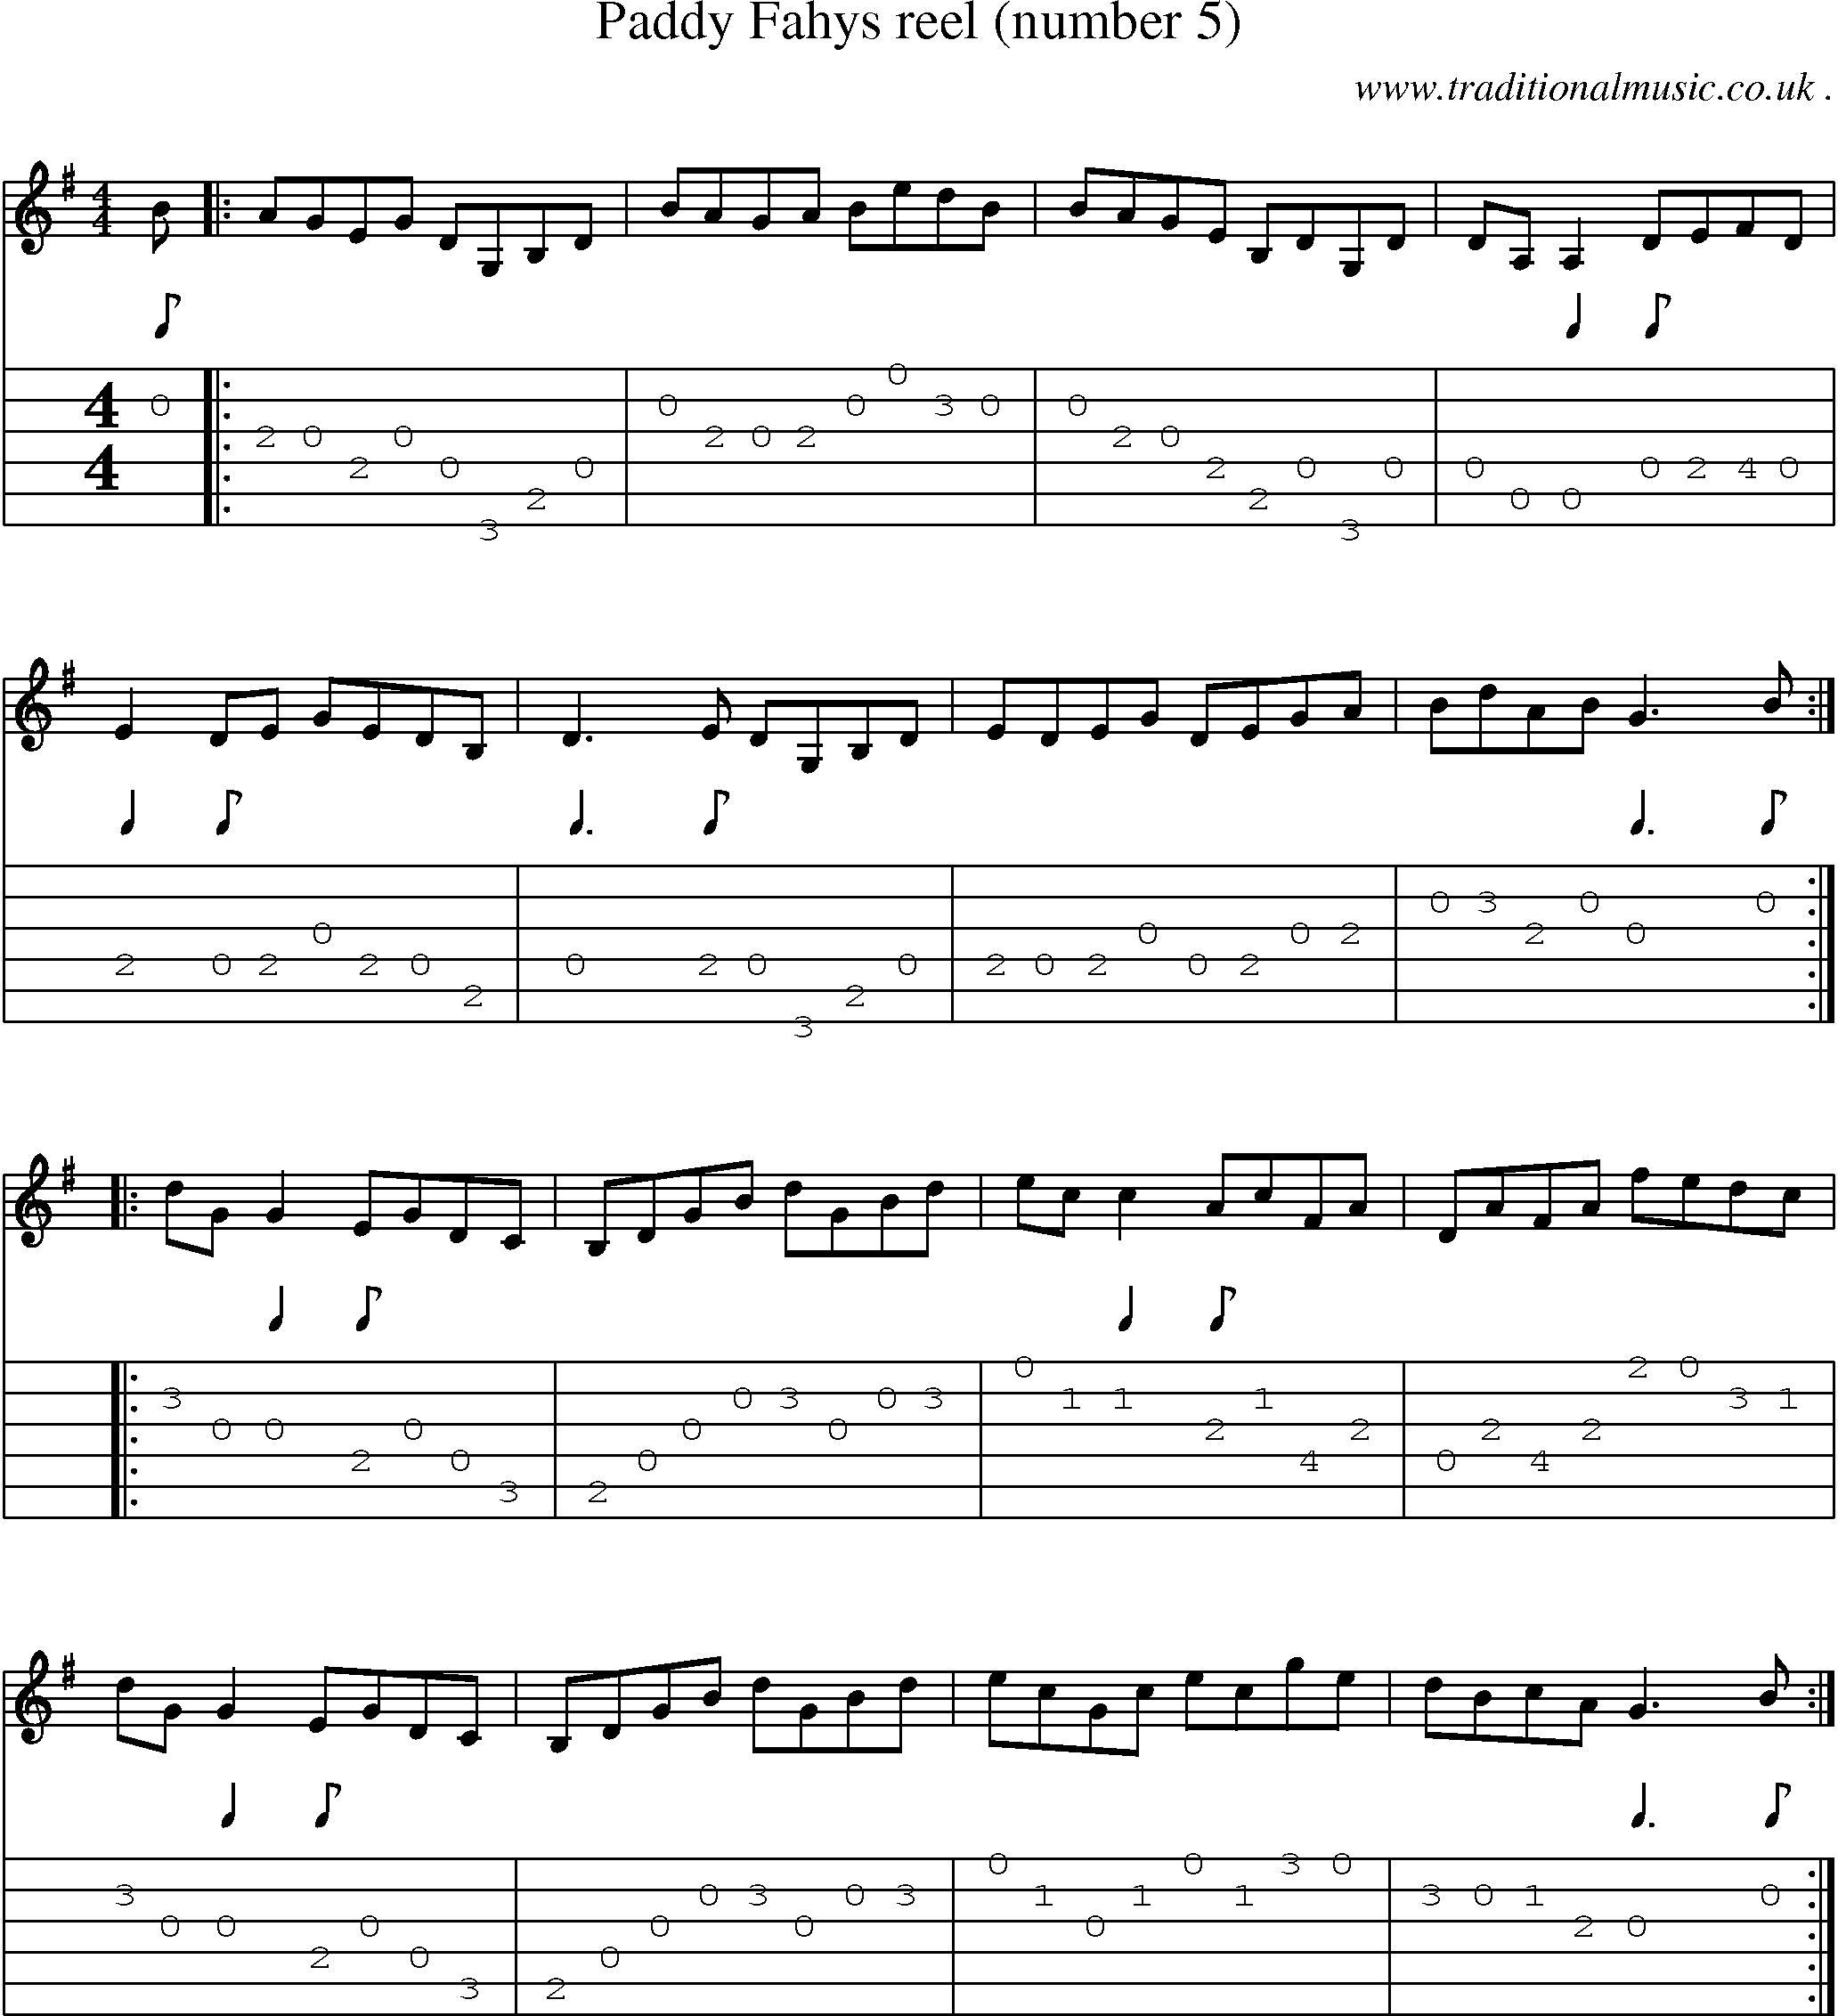 Sheet-Music and Guitar Tabs for Paddy Fahys Reel (number 5)